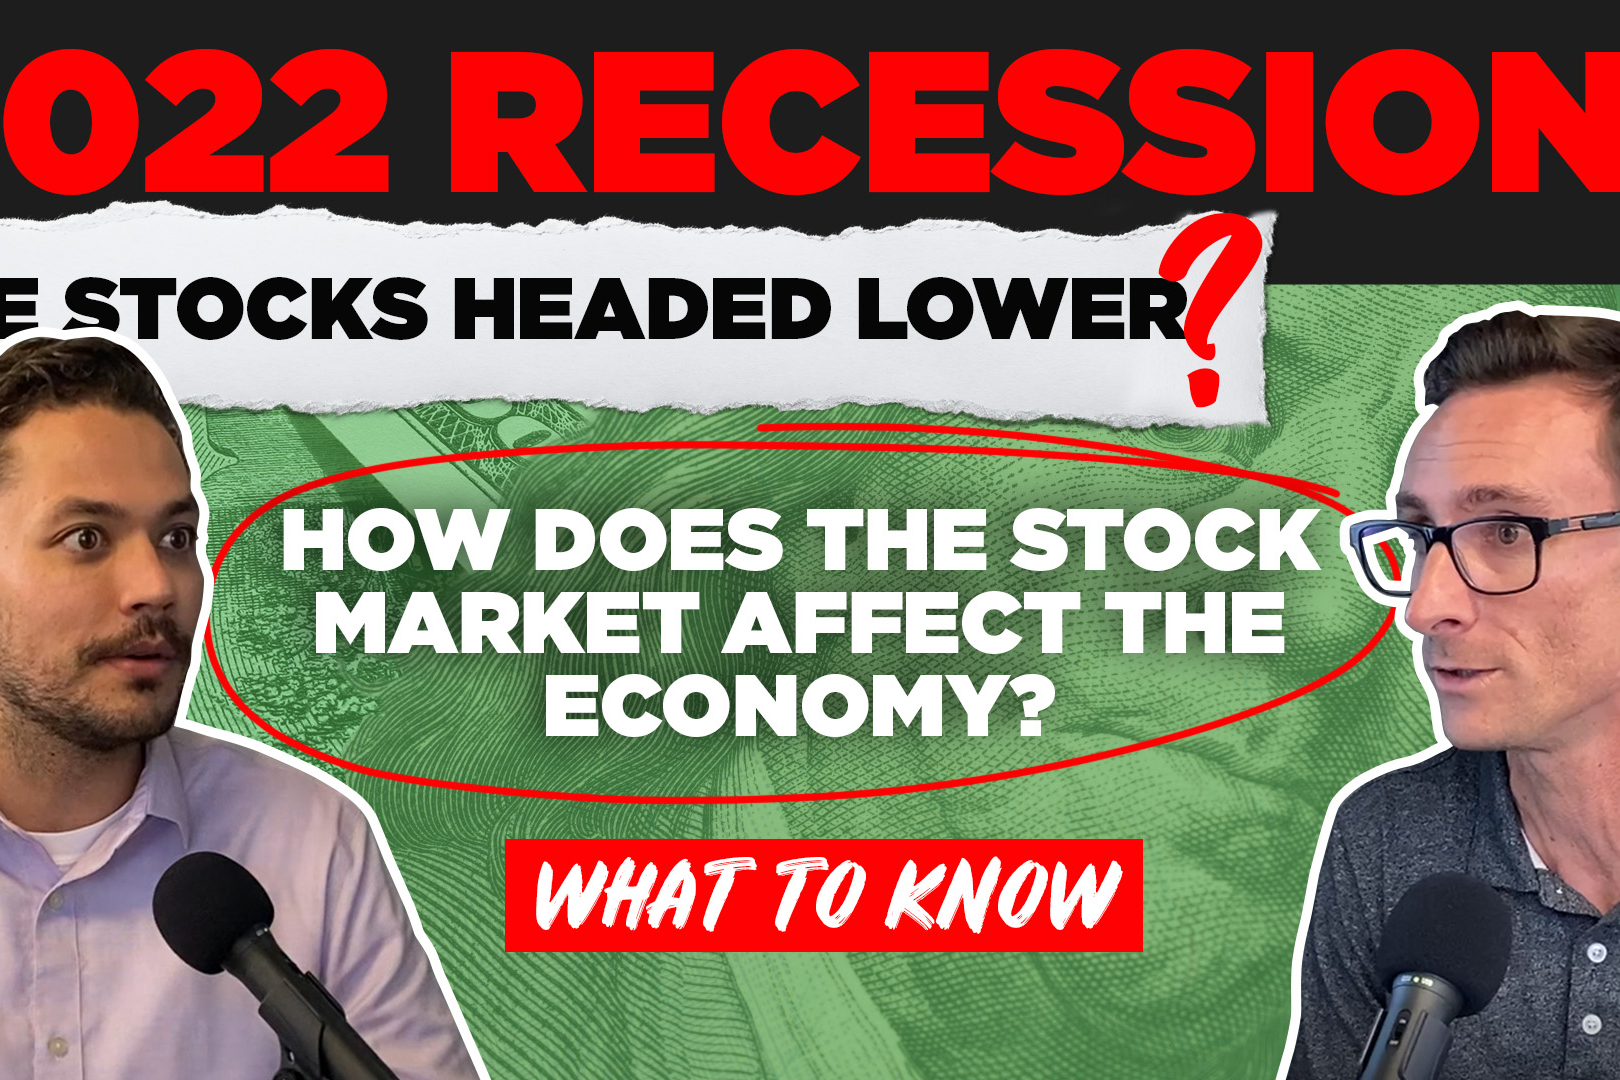 2022 Recession what to know